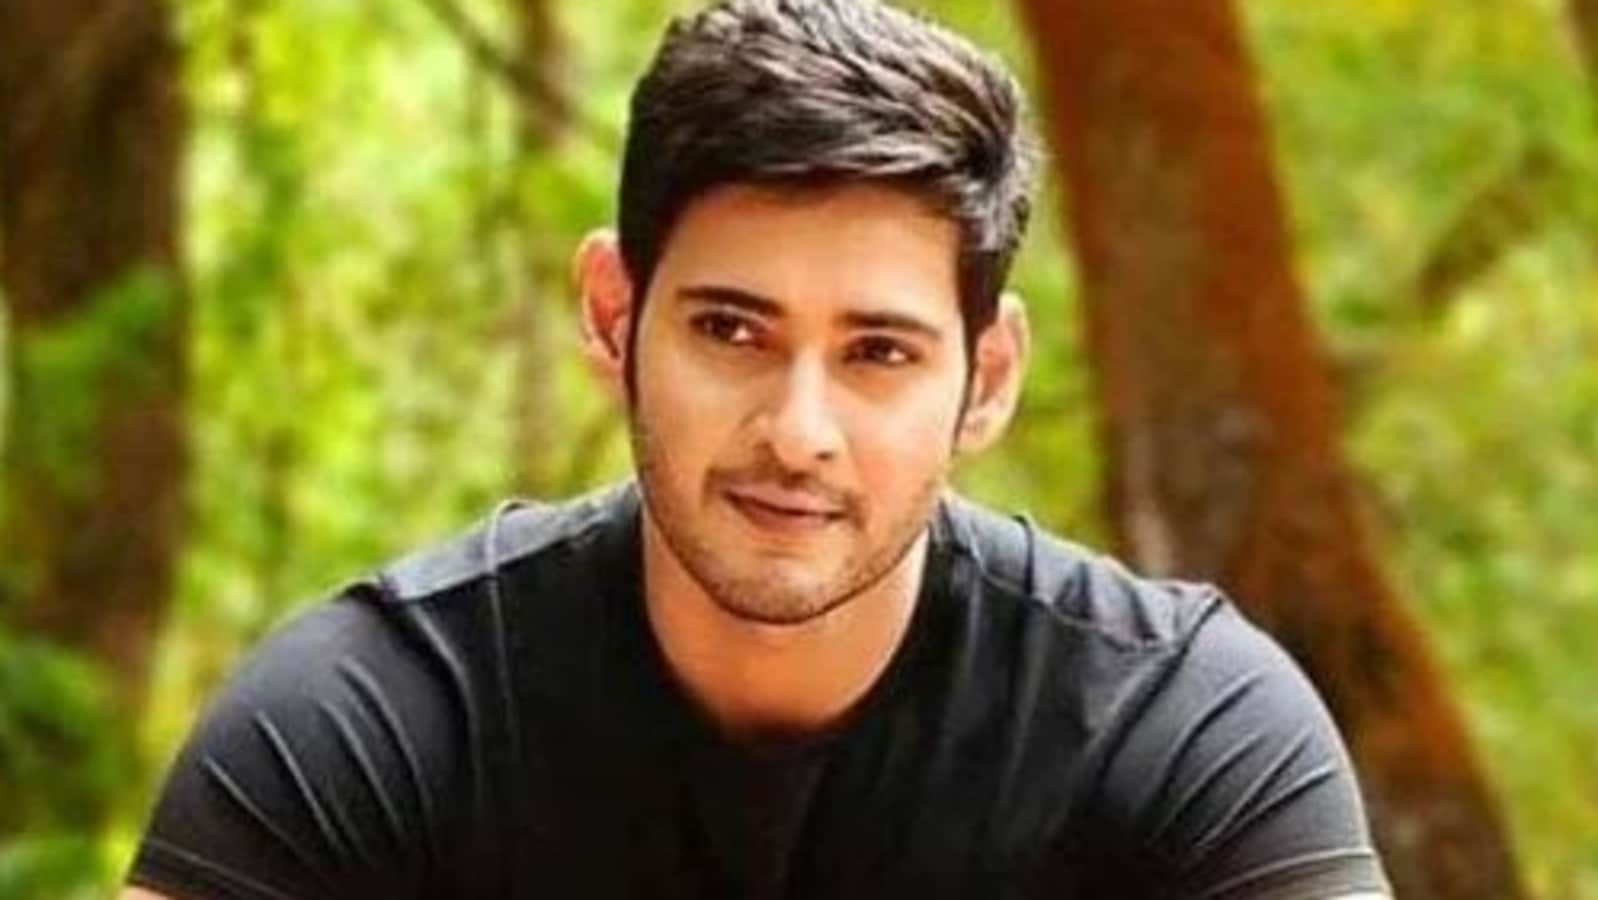 Did you know Mahesh Babu can&#39;t read or write in Telugu? Some fun facts about the actor you must know - Hindustan Times